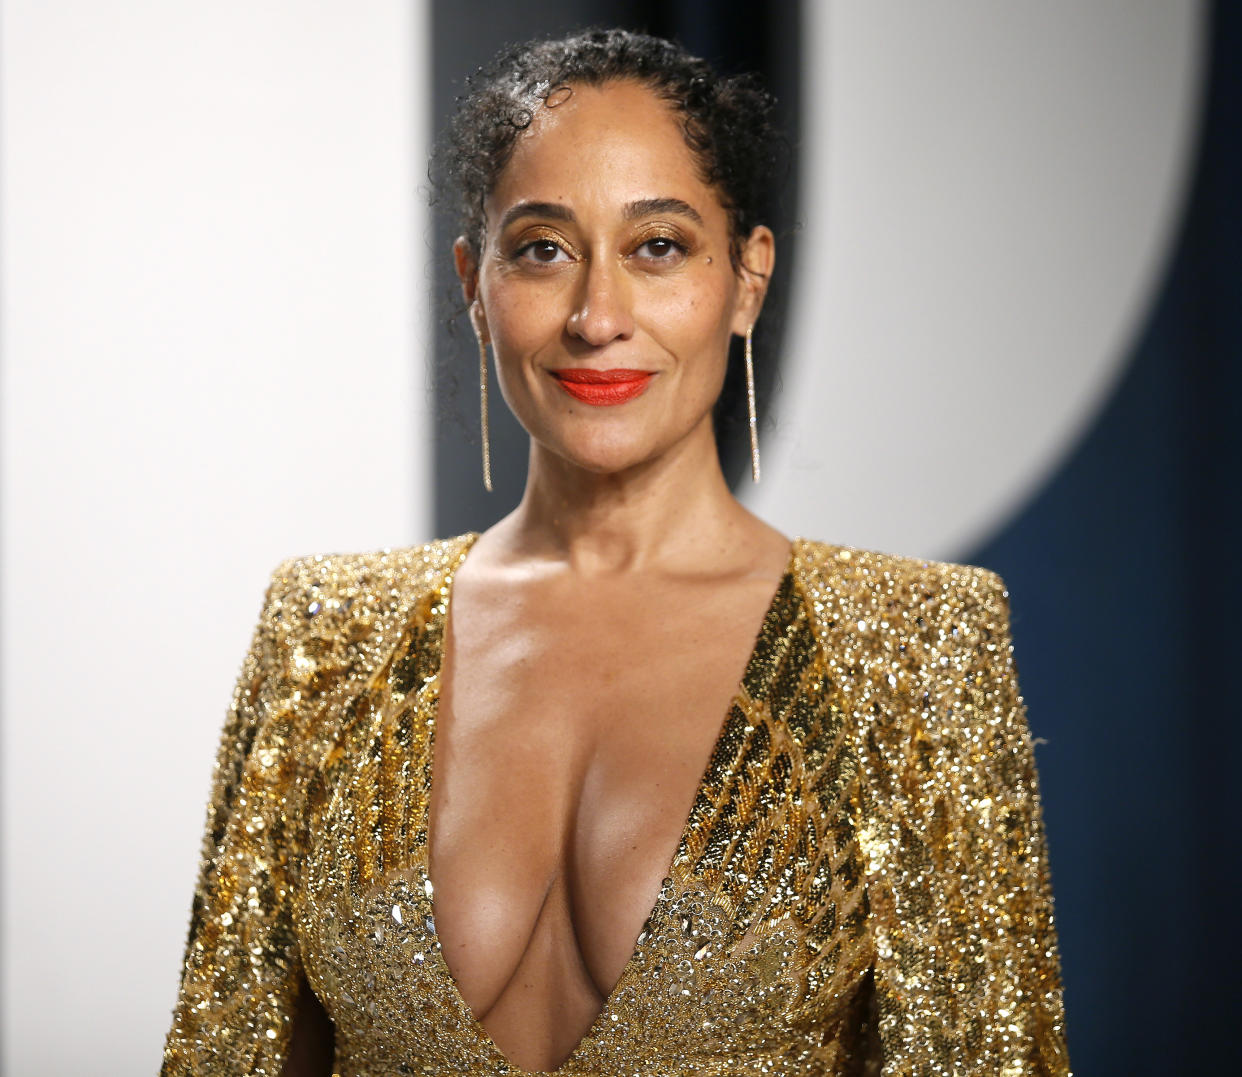 Tracee Ellis Ross dedicated a loving message to her post-pandemic body. (Photo: REUTERS/Danny Moloshok)